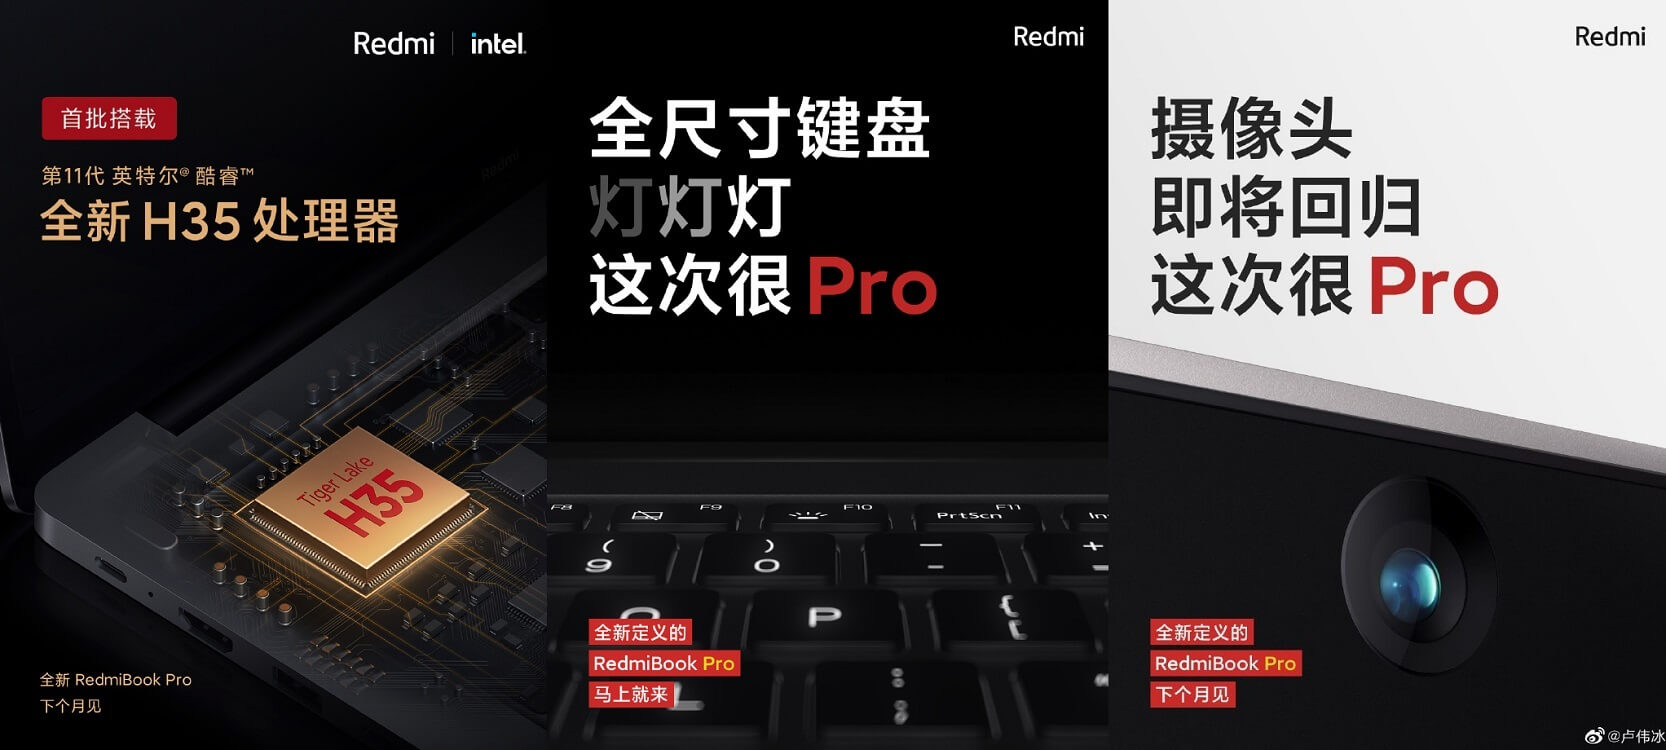 Redmibook Pro features